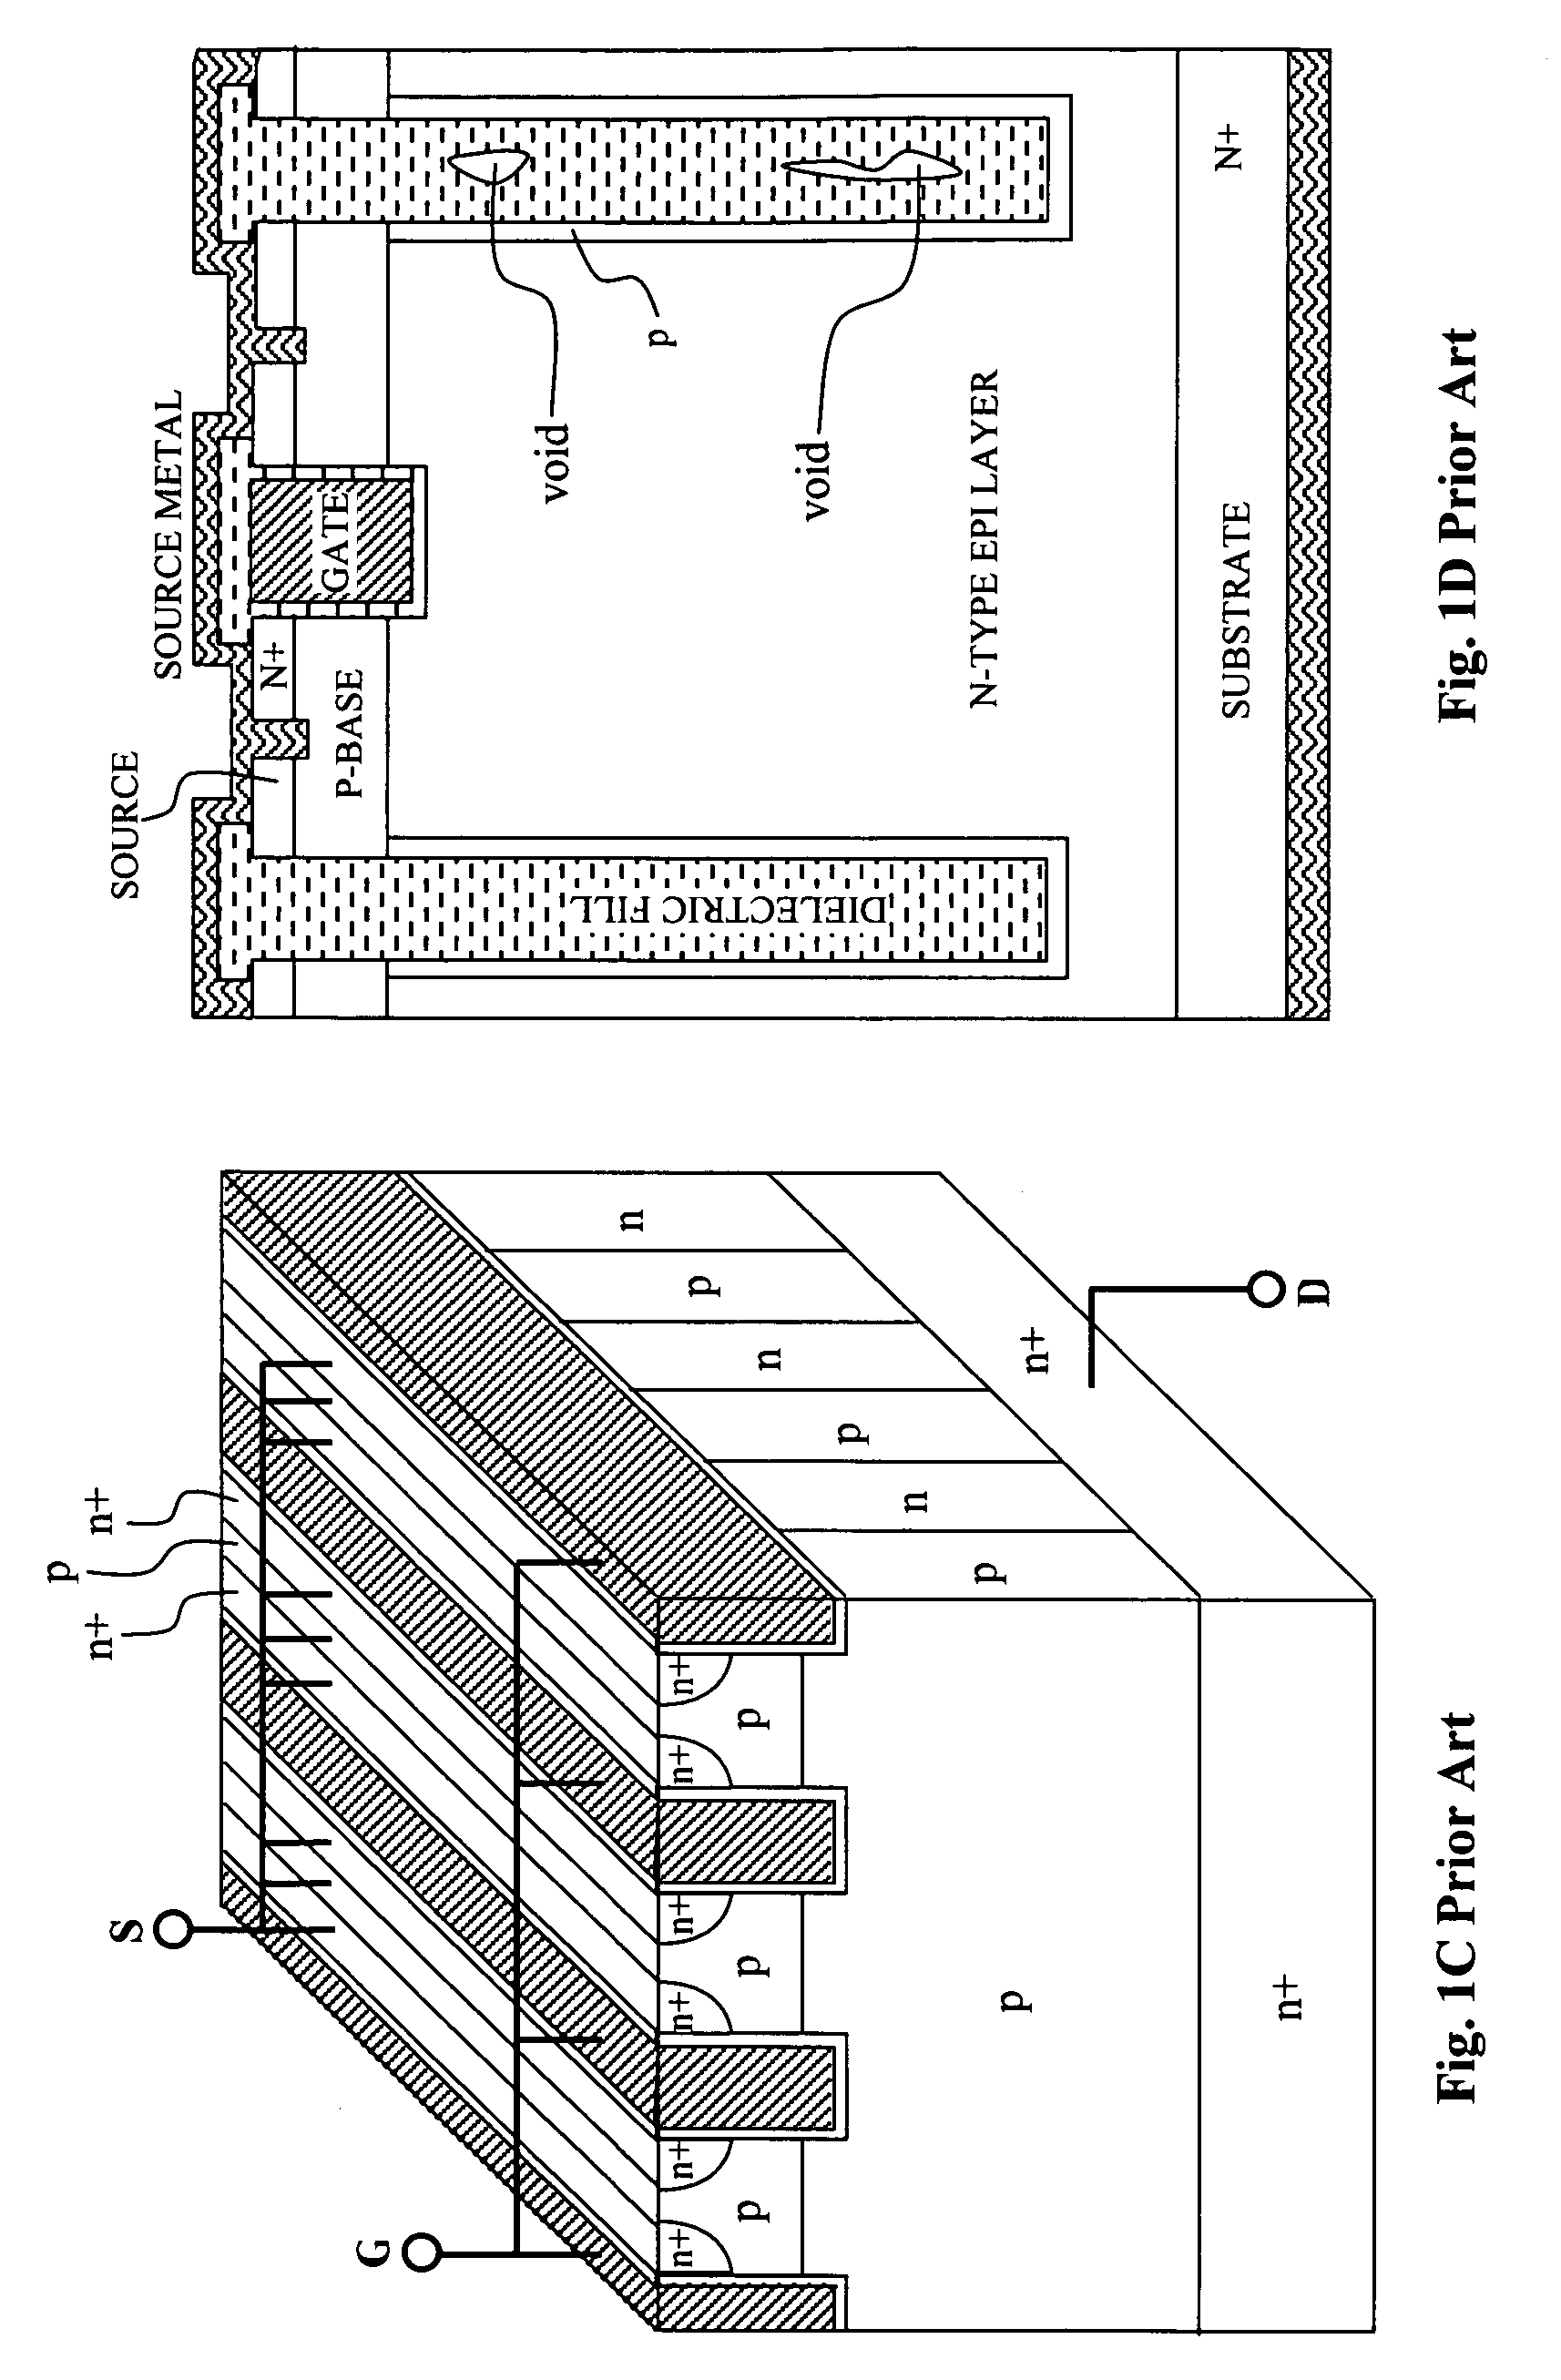 Nano-tube MOSFET technology and devices